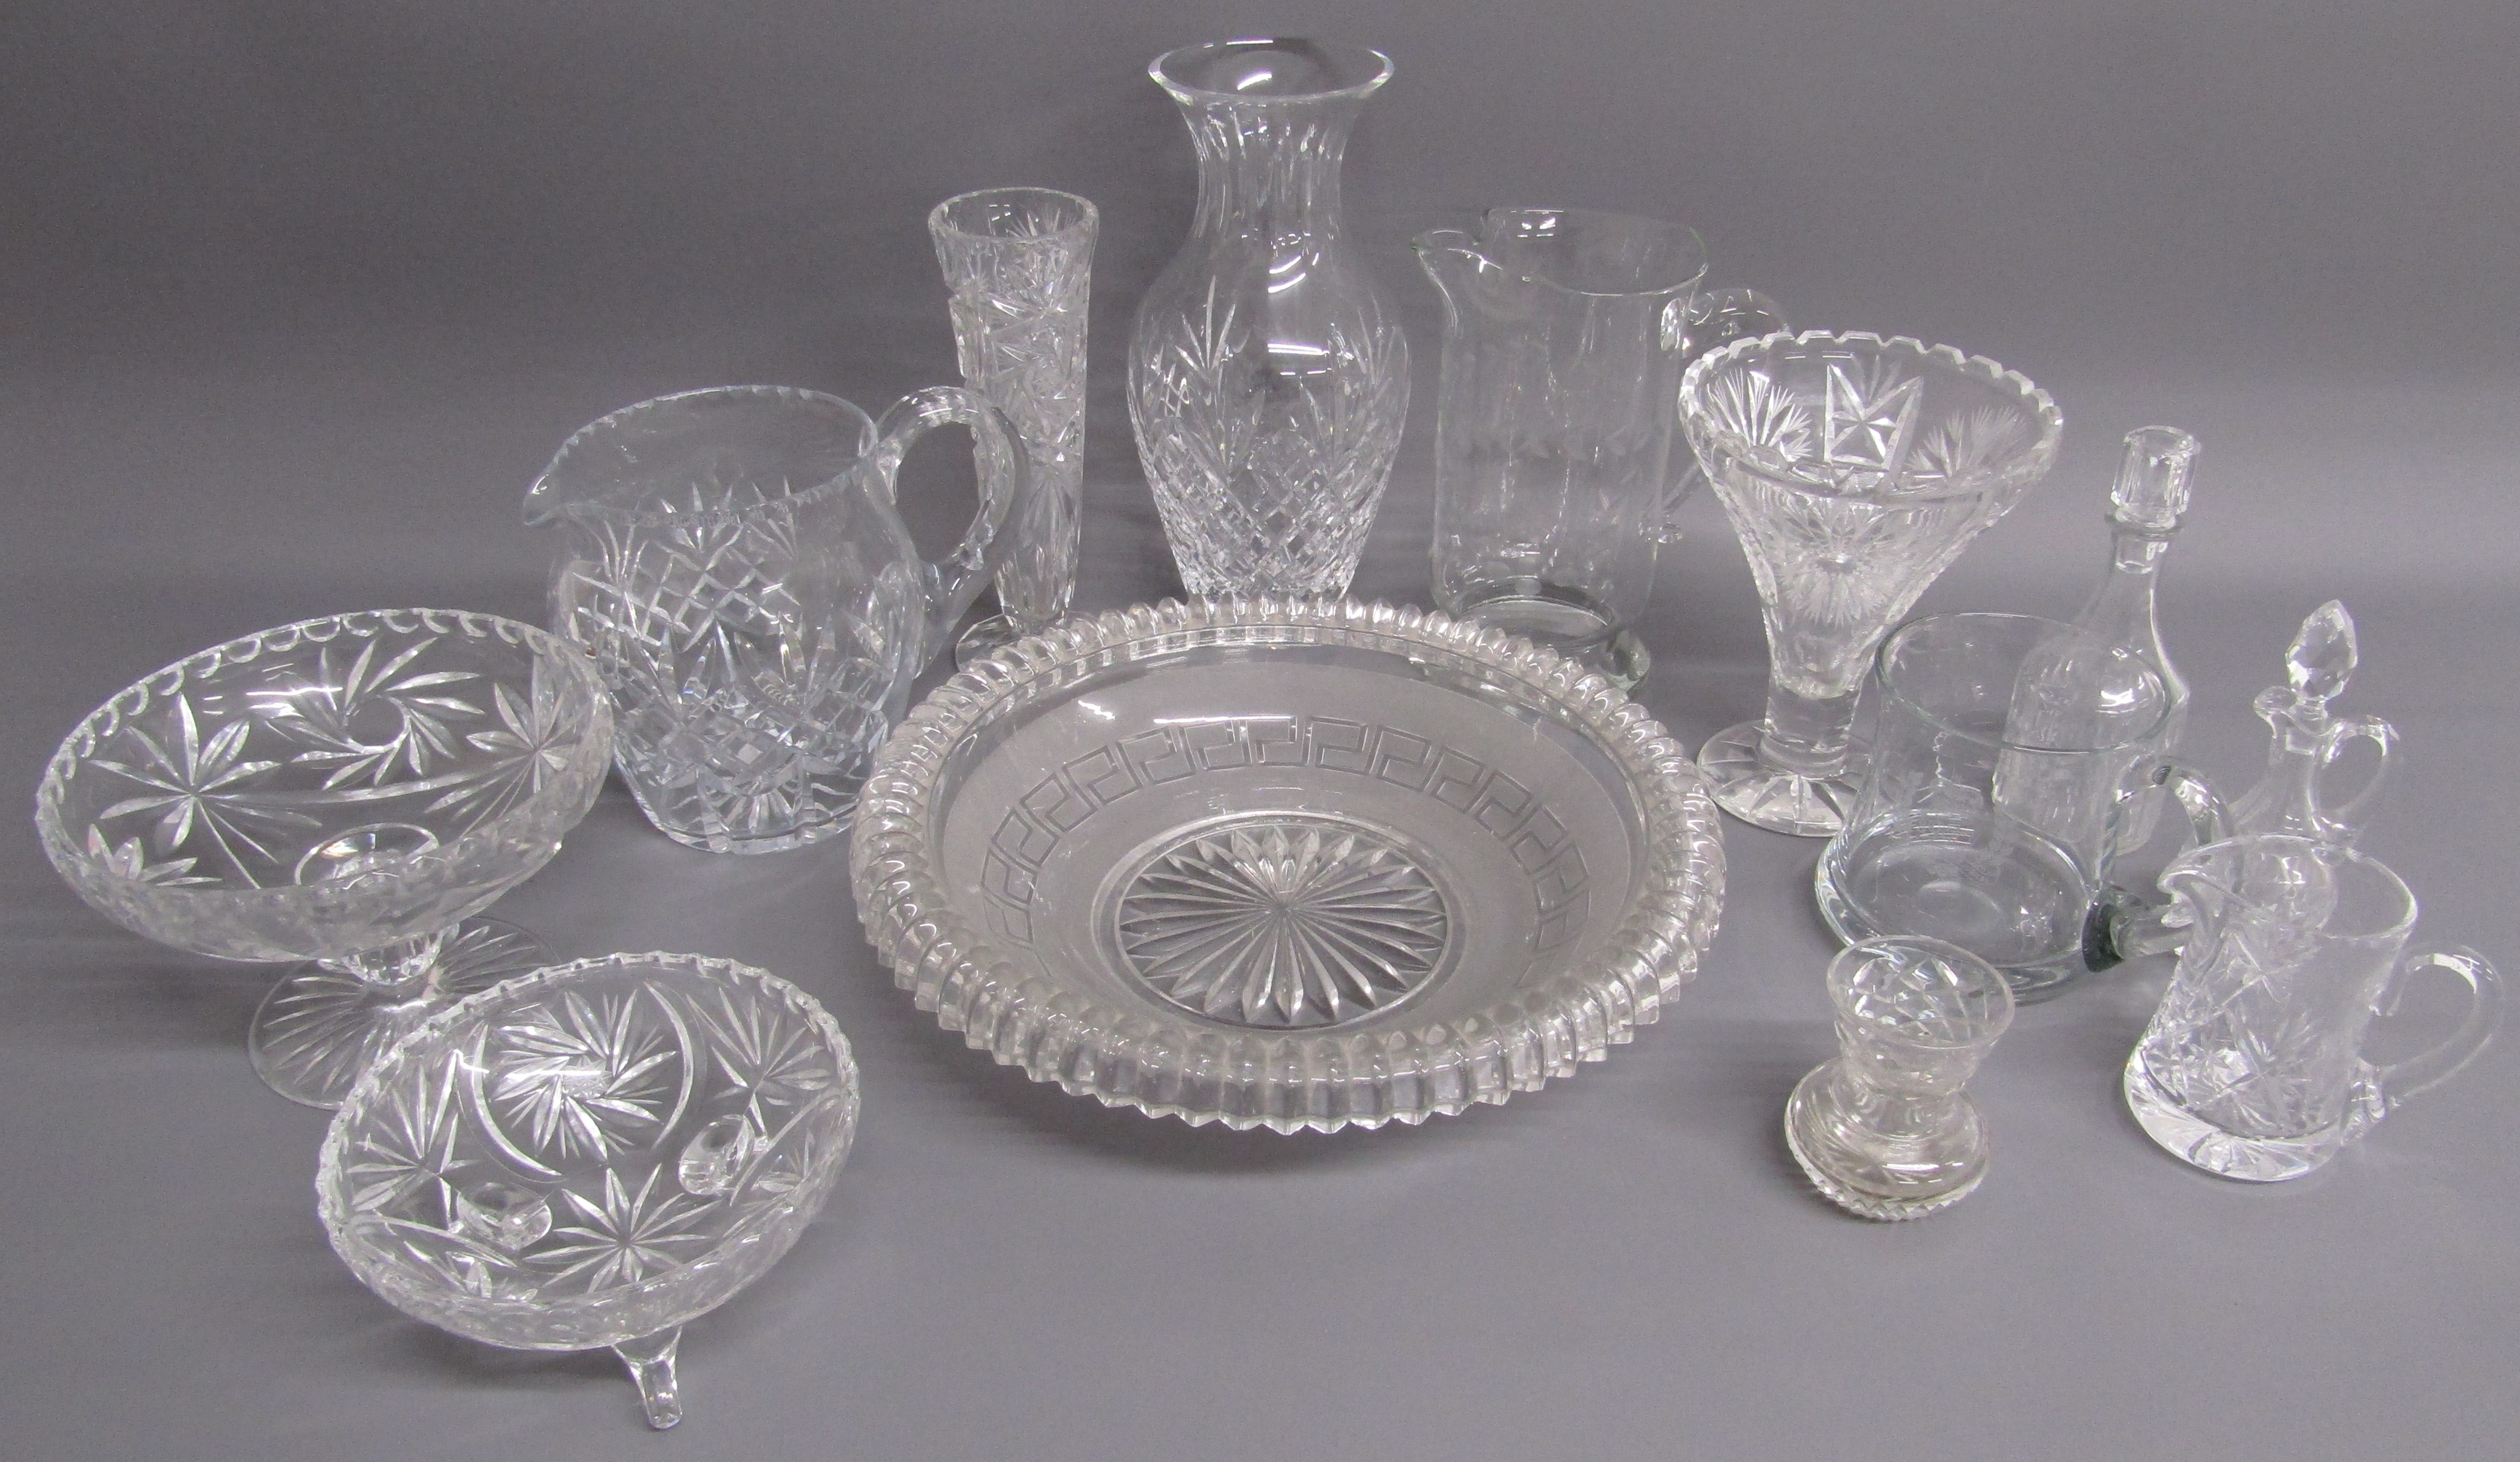 Collection of crystal and glassware includes vases, jugs and a large dish